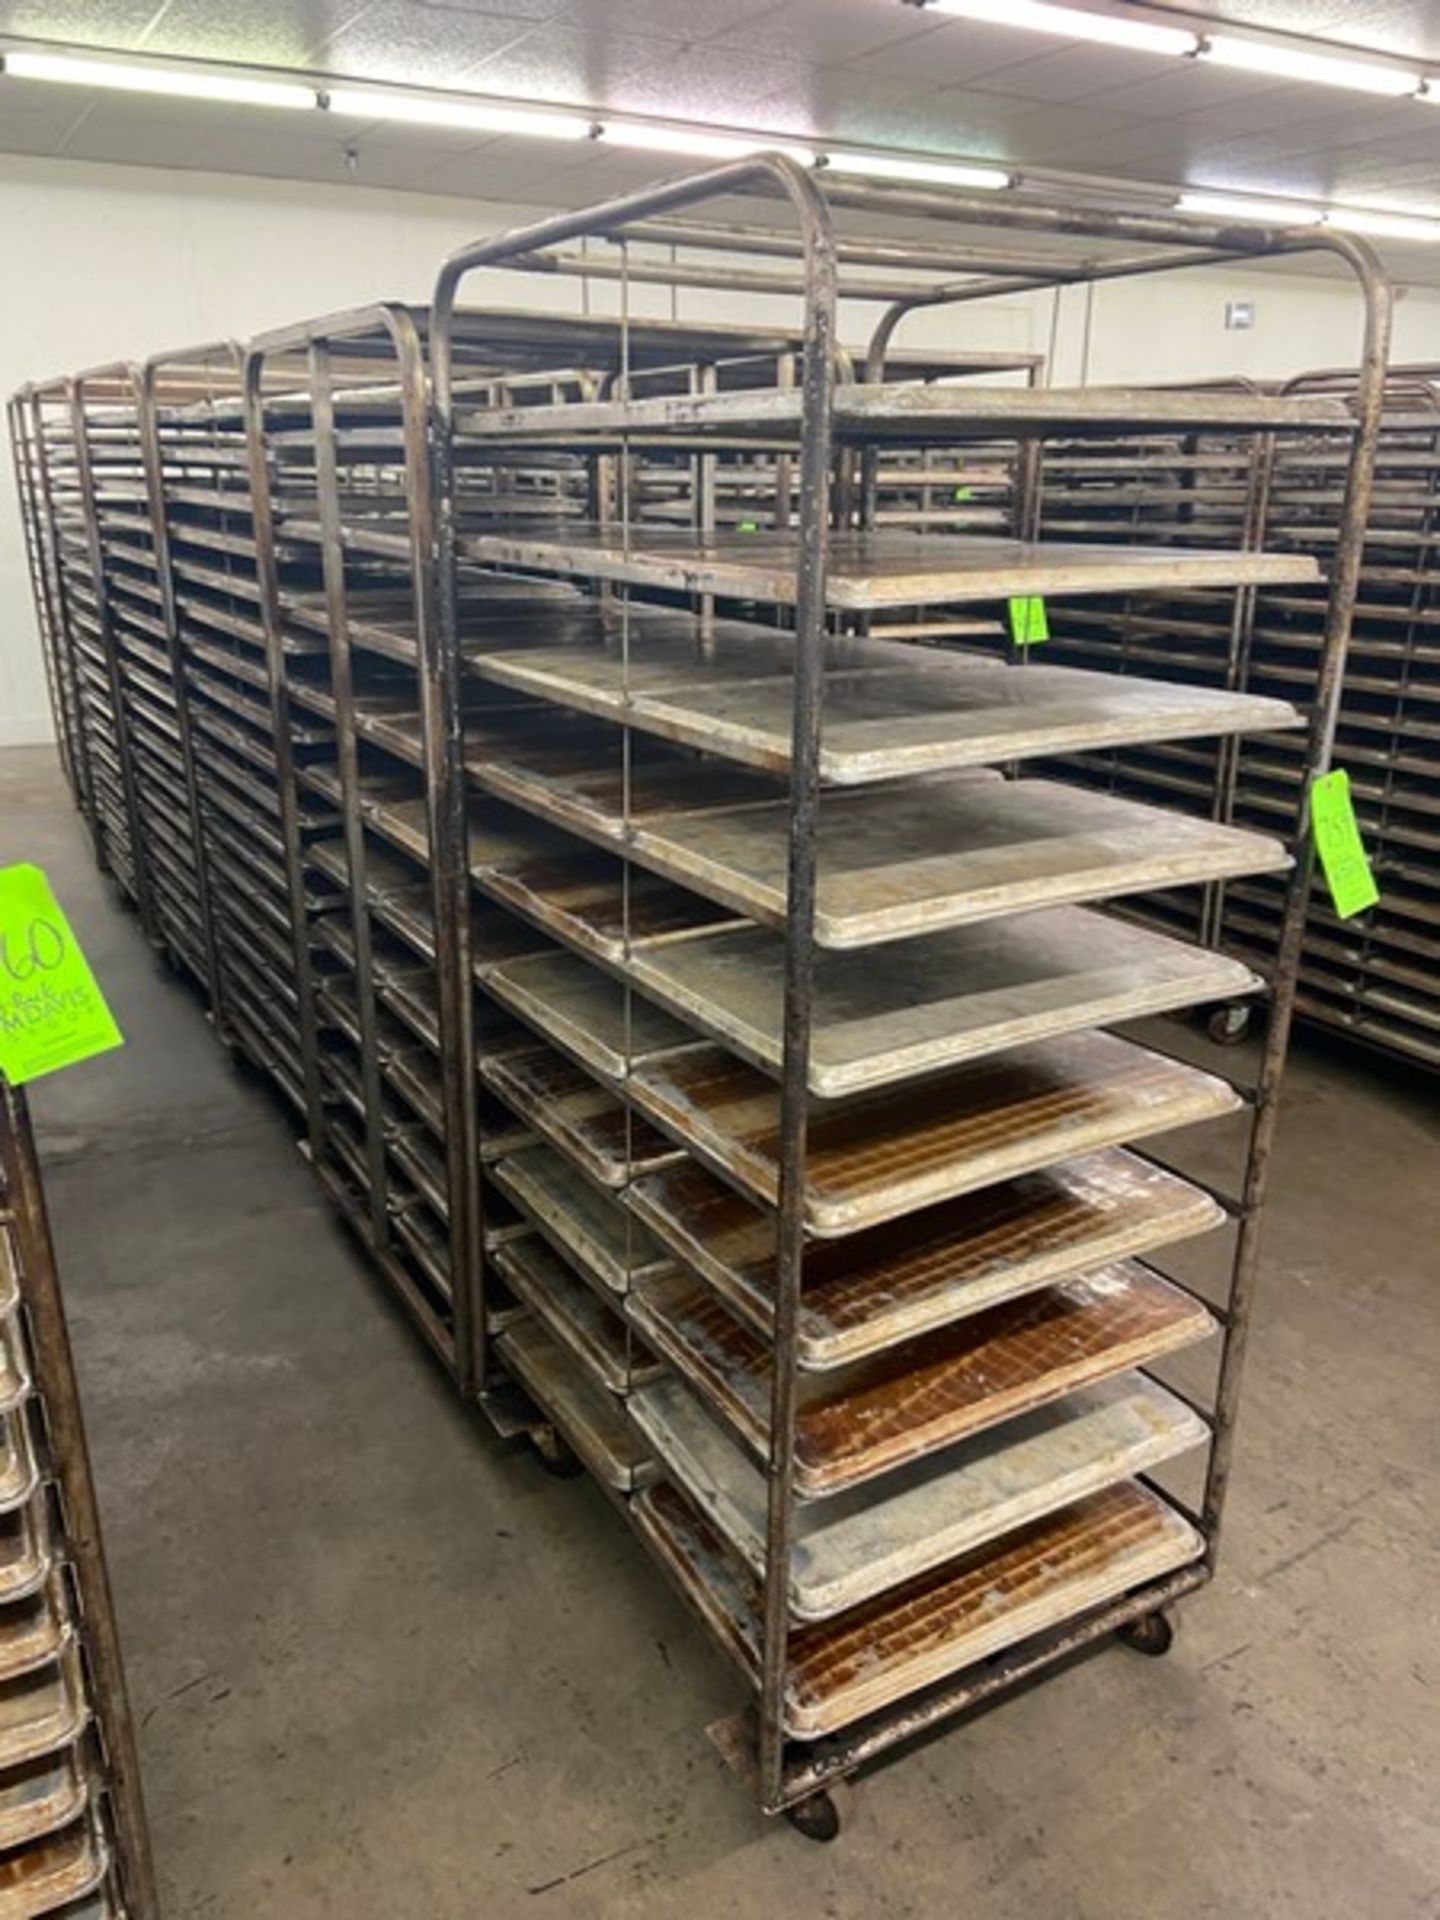 (7) PORTABLE DOUBLE SIDED BAKING PAN RACKS, MOUNTED ON CASTERS (LOCATED IN HERMITAGE, PA) - Image 2 of 3